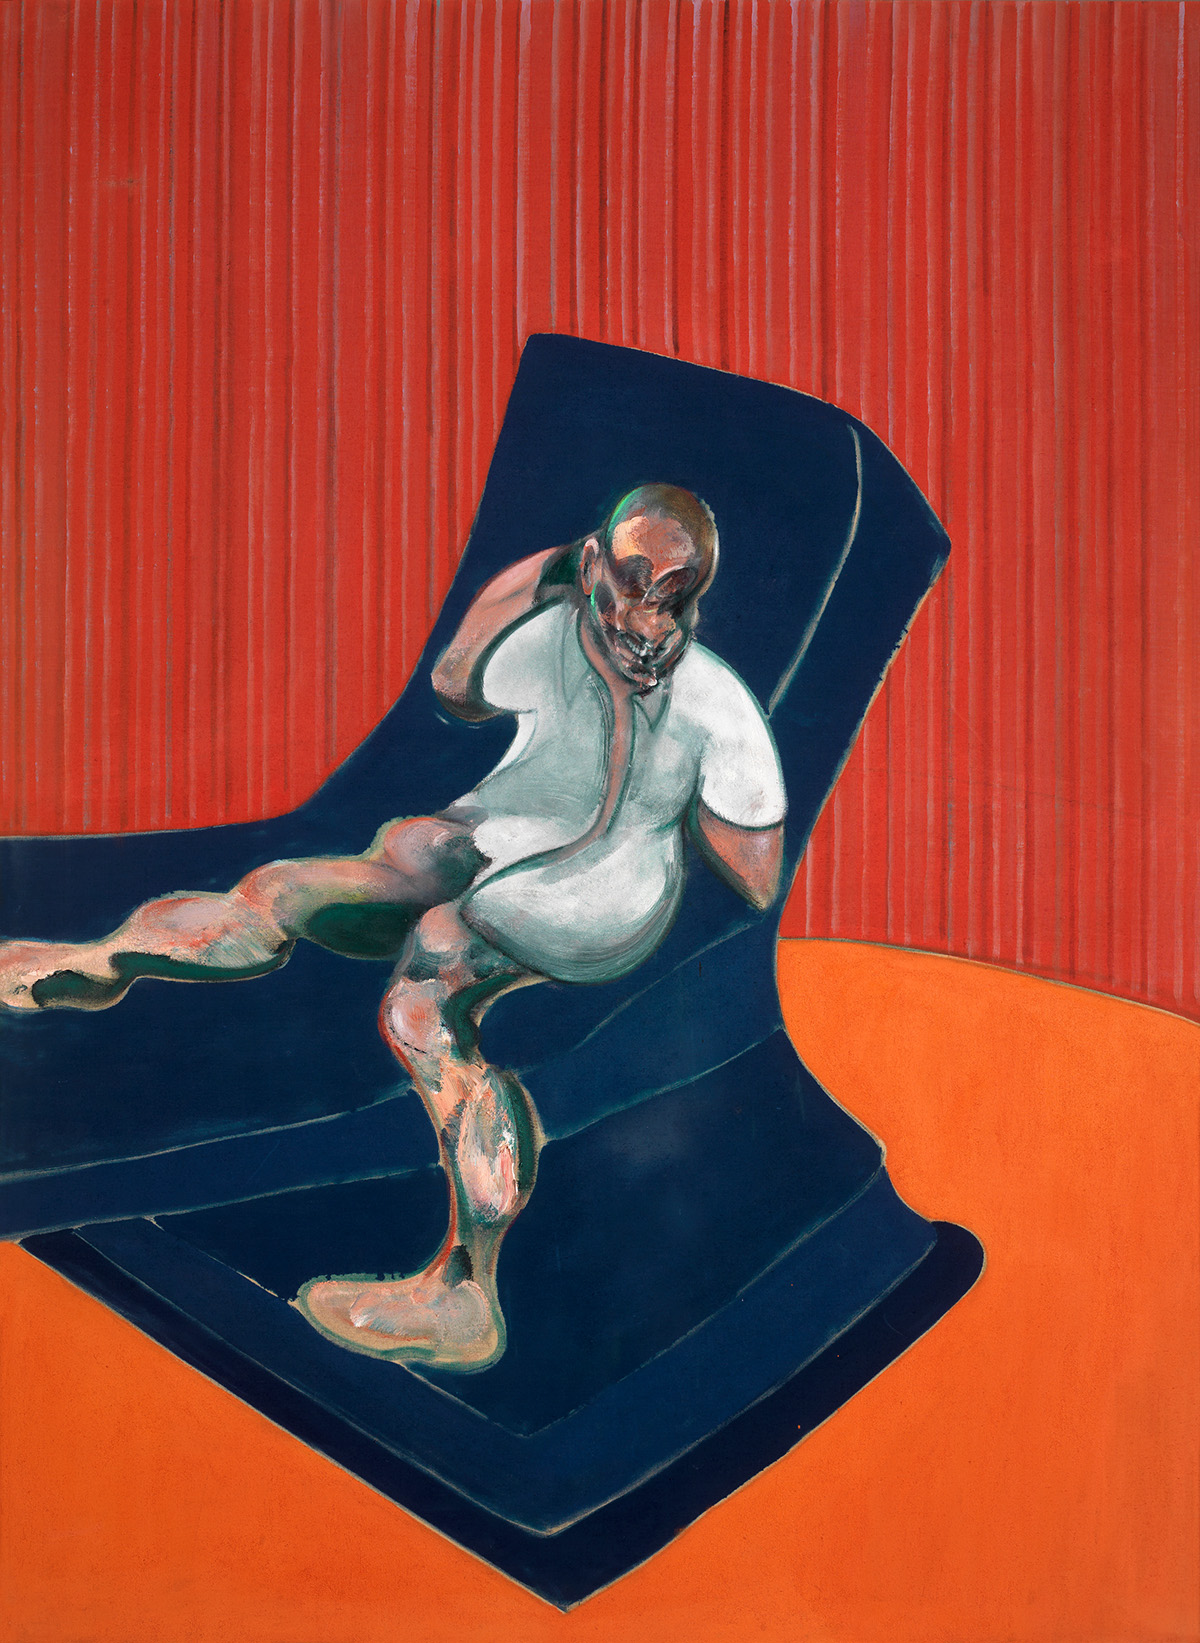 SEATED FIGURE ON COUCH, 1962. Oil and sand on canvas. CR no. 62-10. © The Estate of Francis Bacon / DACS London 2022. All rights reserved.